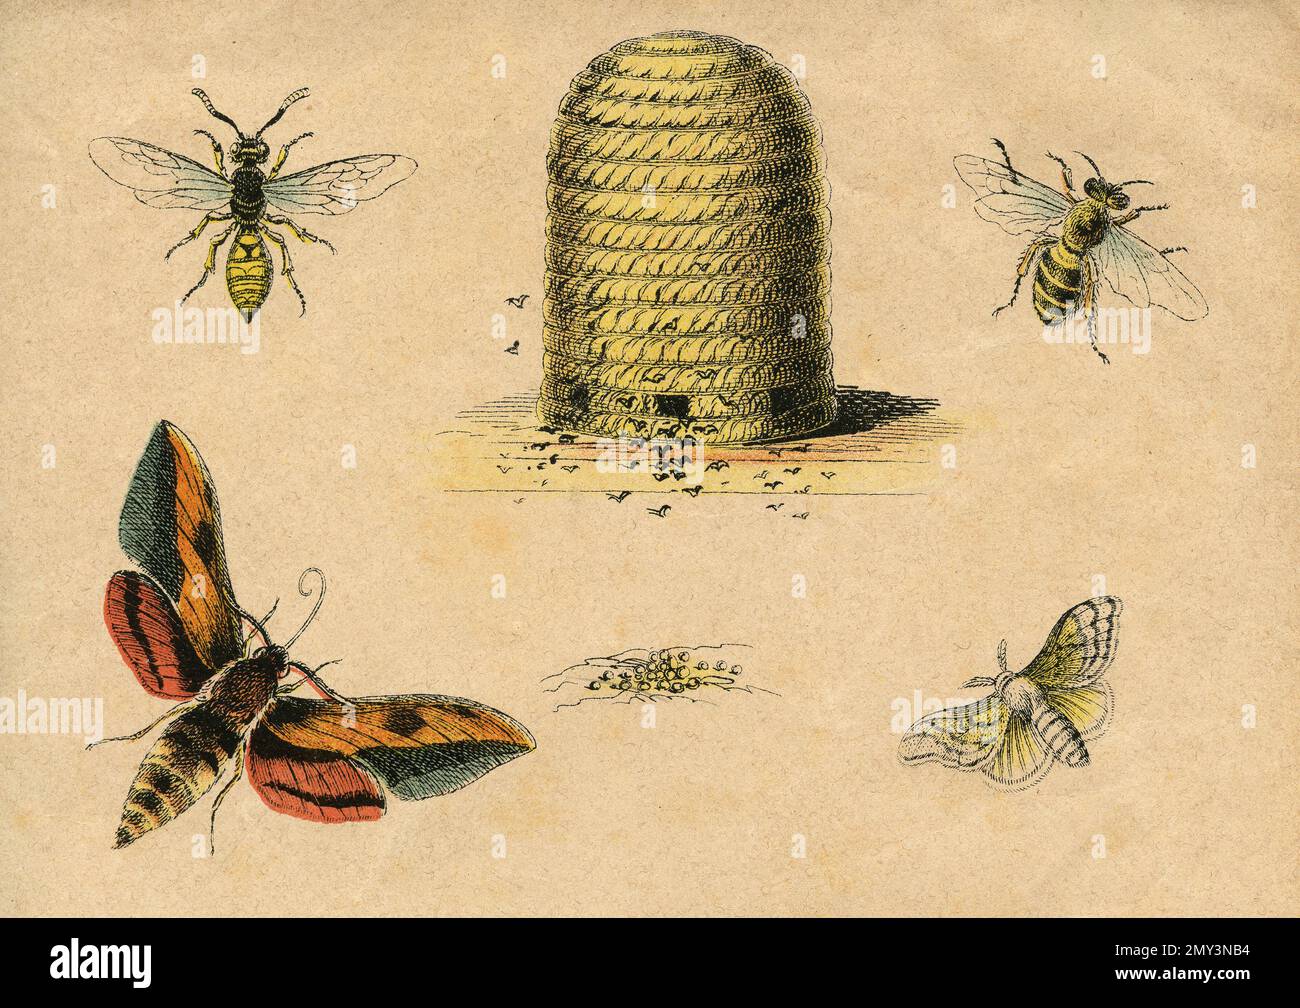 Animal life in Europe, Insects: Bees, butterfly, Caterpillar, and others, color illustration, 1800s Stock Photo